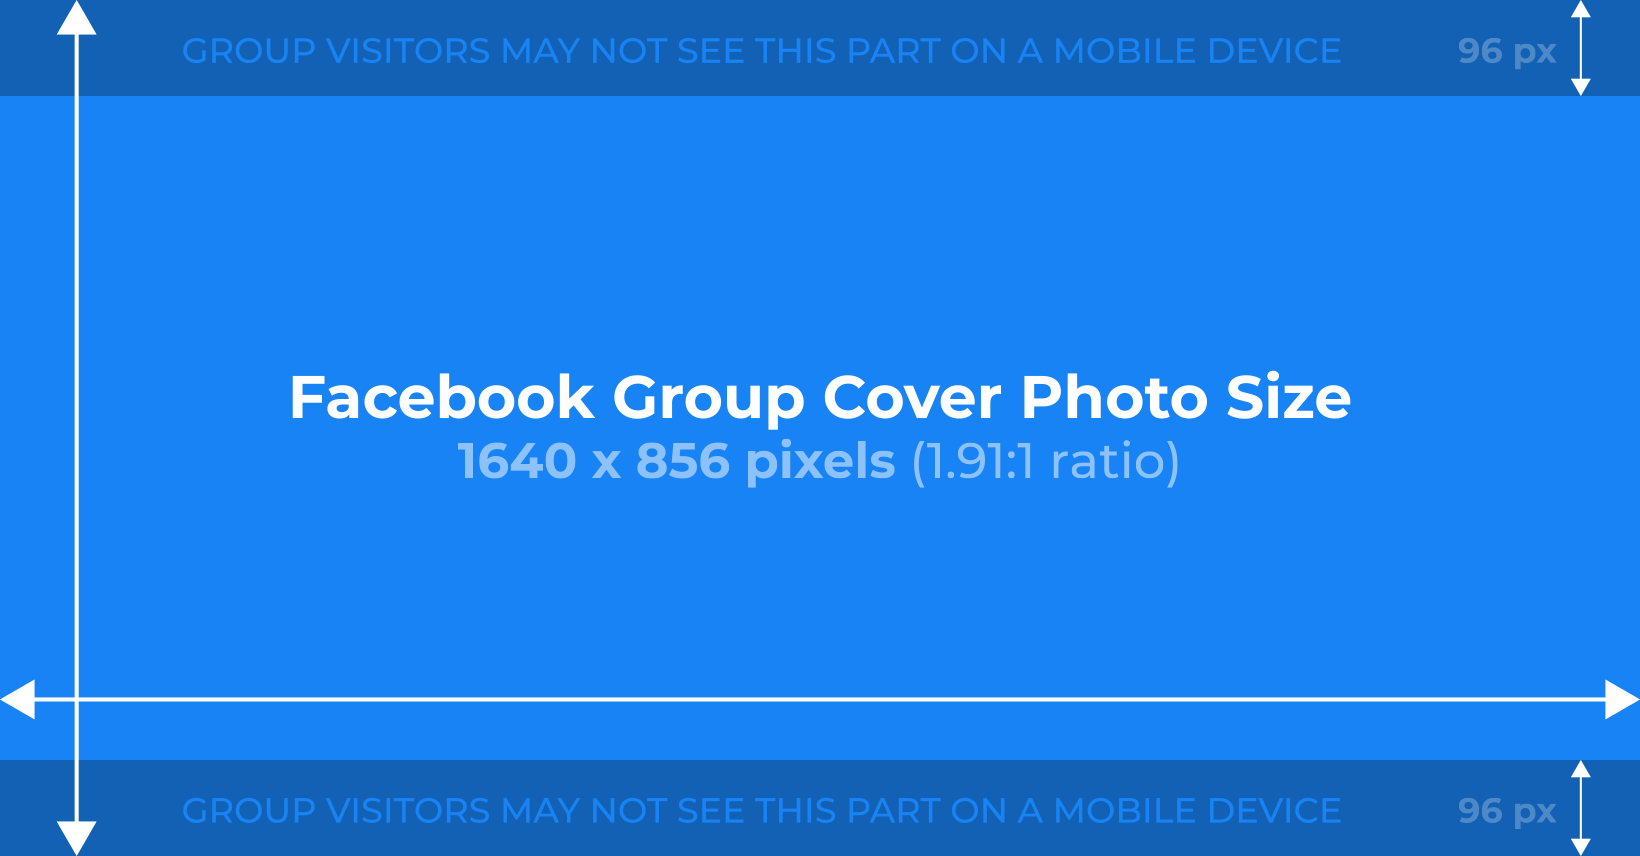 Facebook group cover photo size